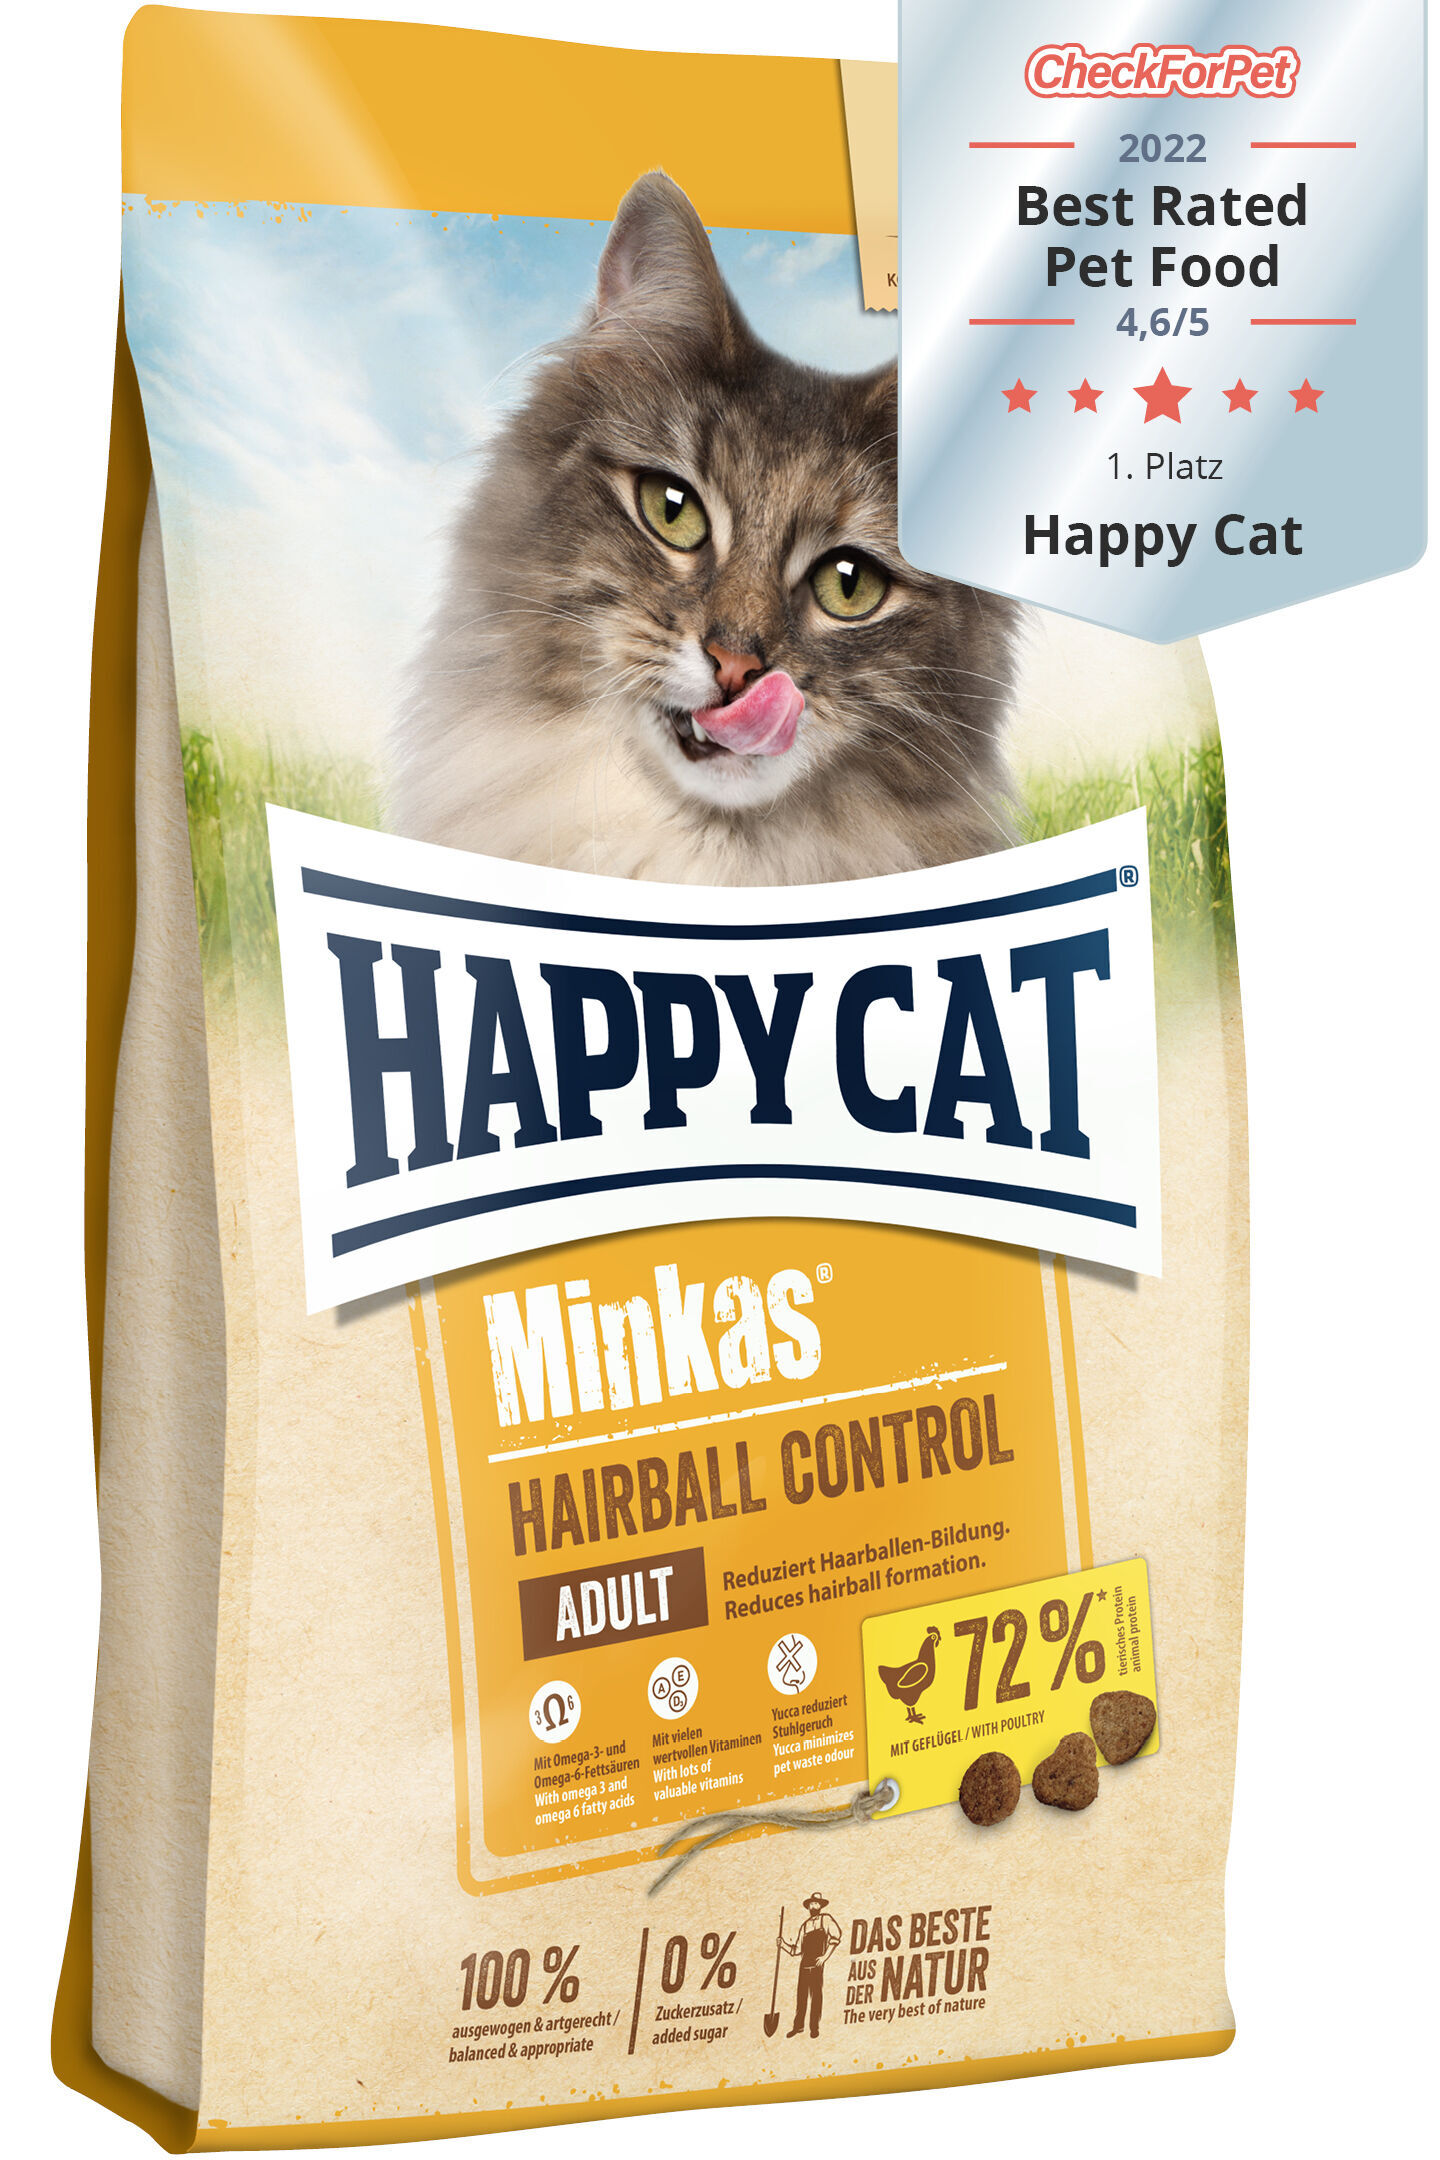 Minkas Hairball Control Poultry